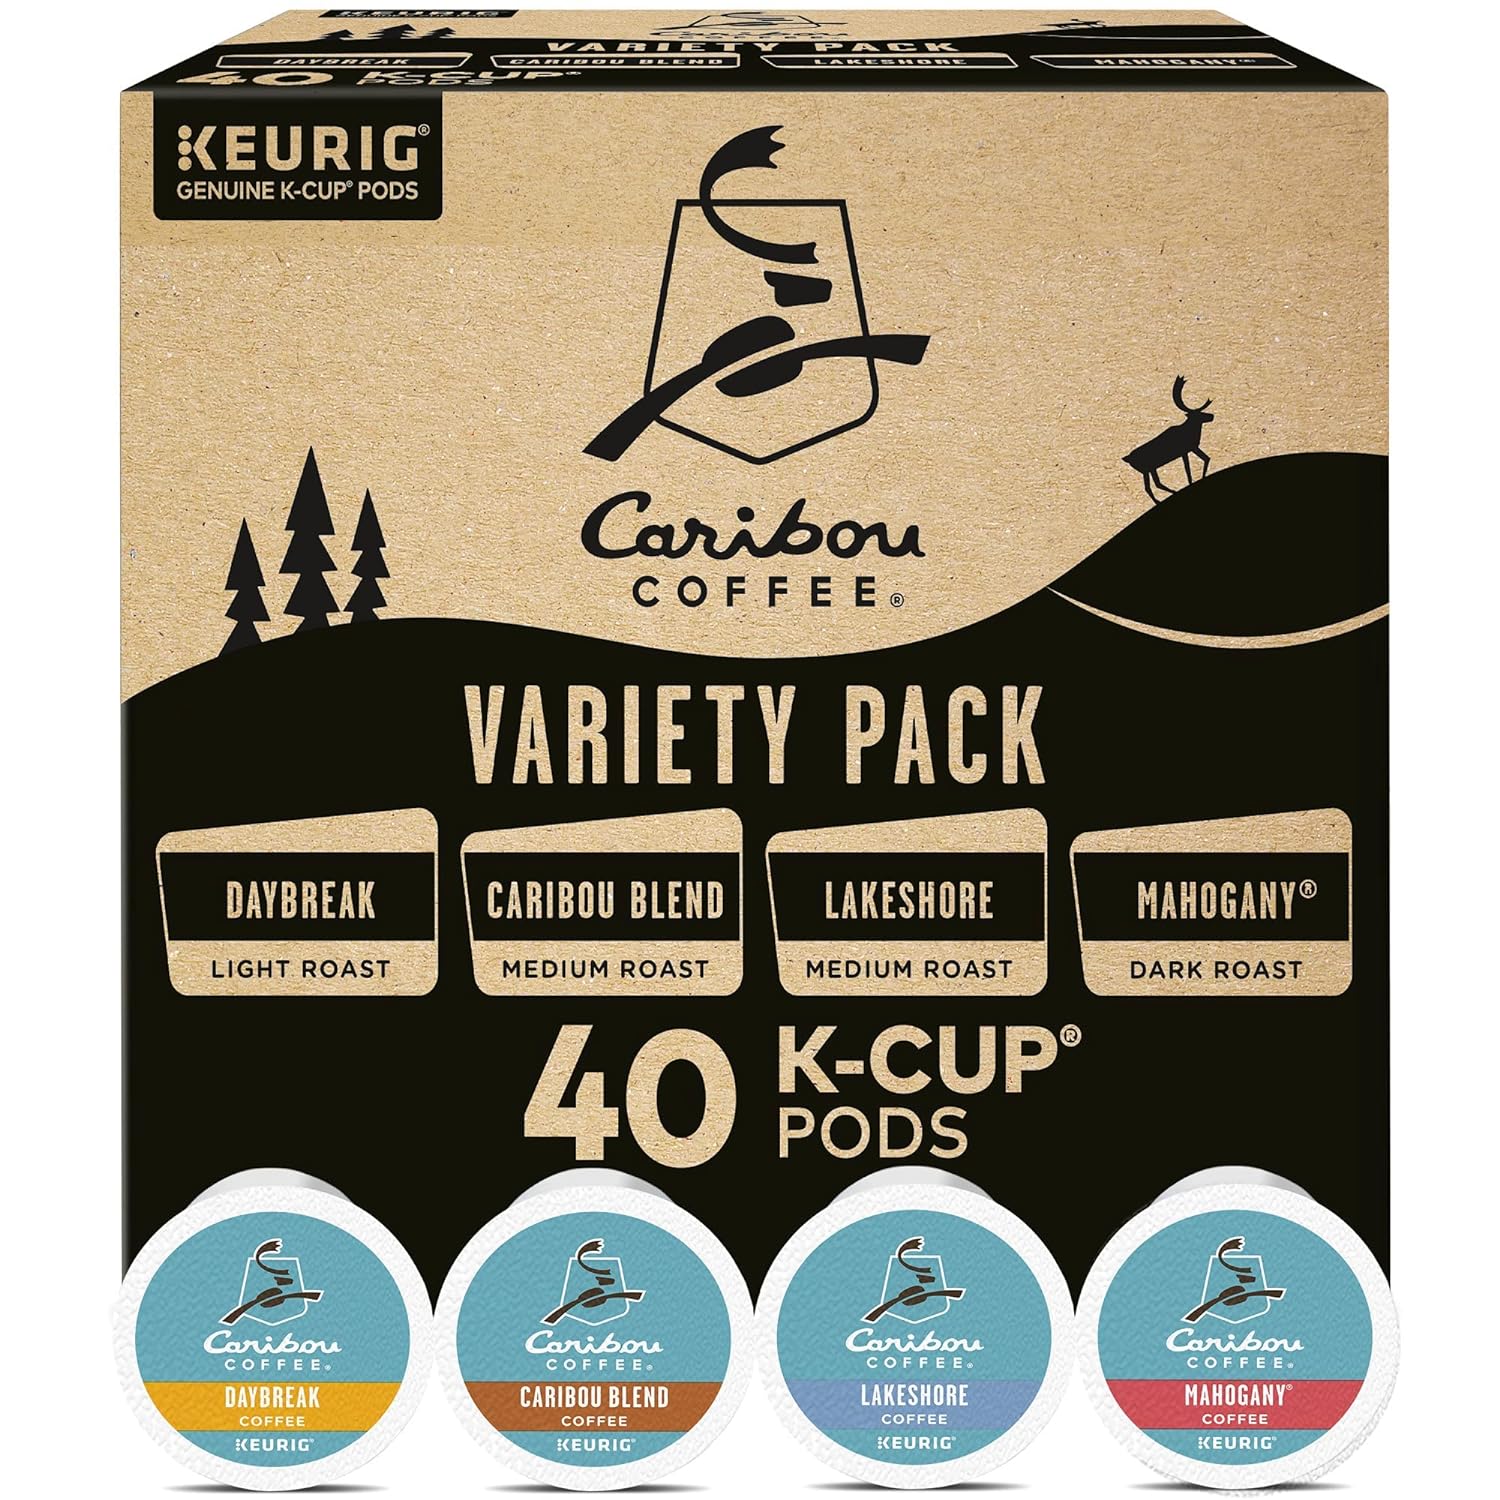 Caribou Coffee Favorites Variety Pack, Single-Serve Coffee K-Cup Pods Sampler, 40 Count